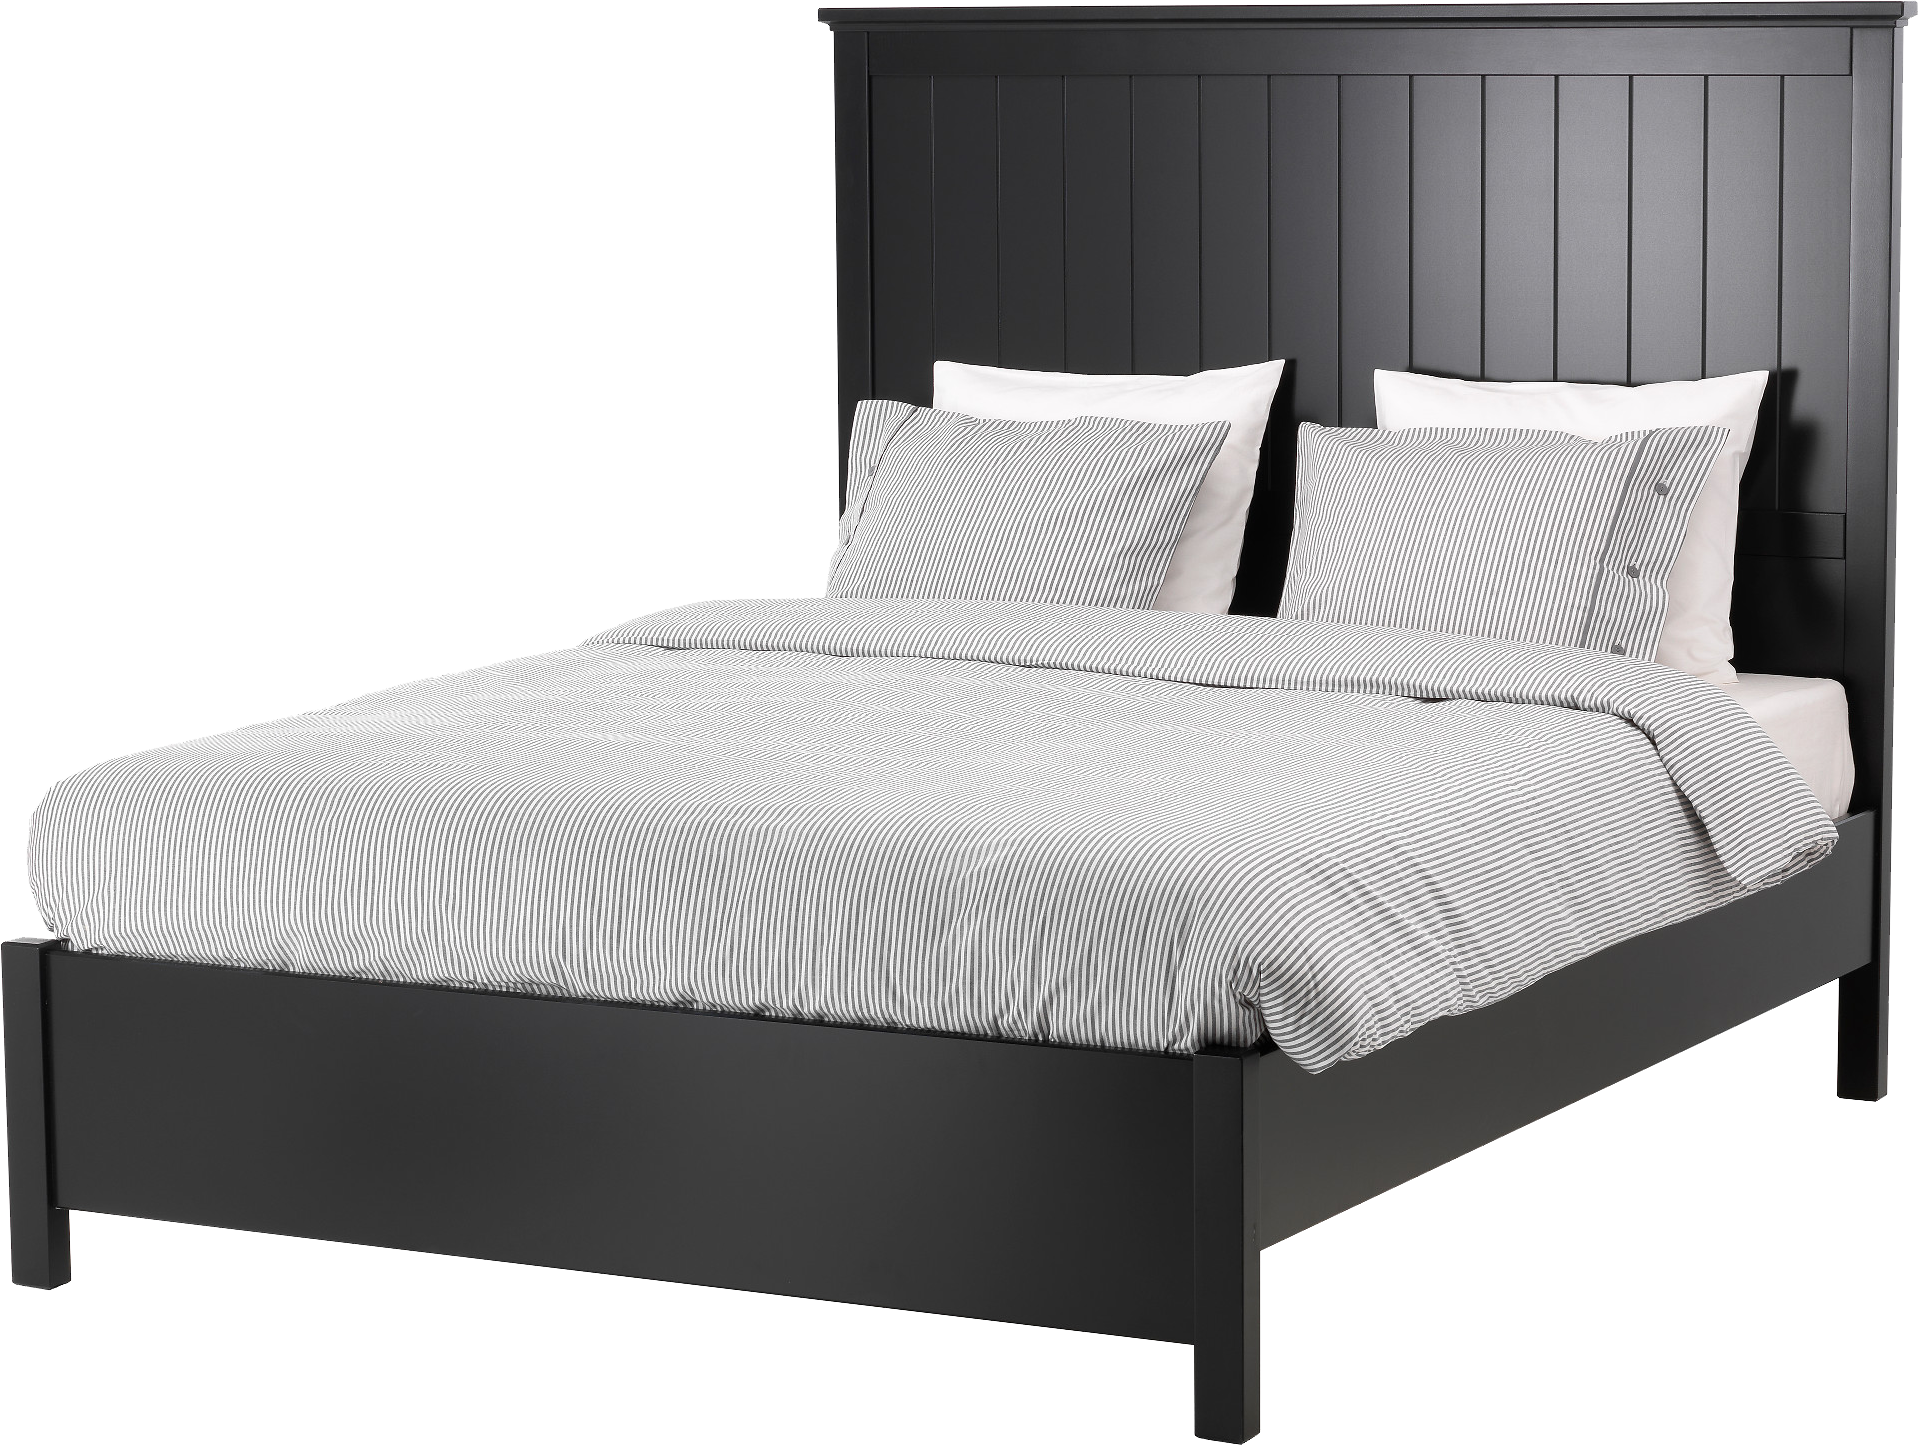 Bed PNG images free download.